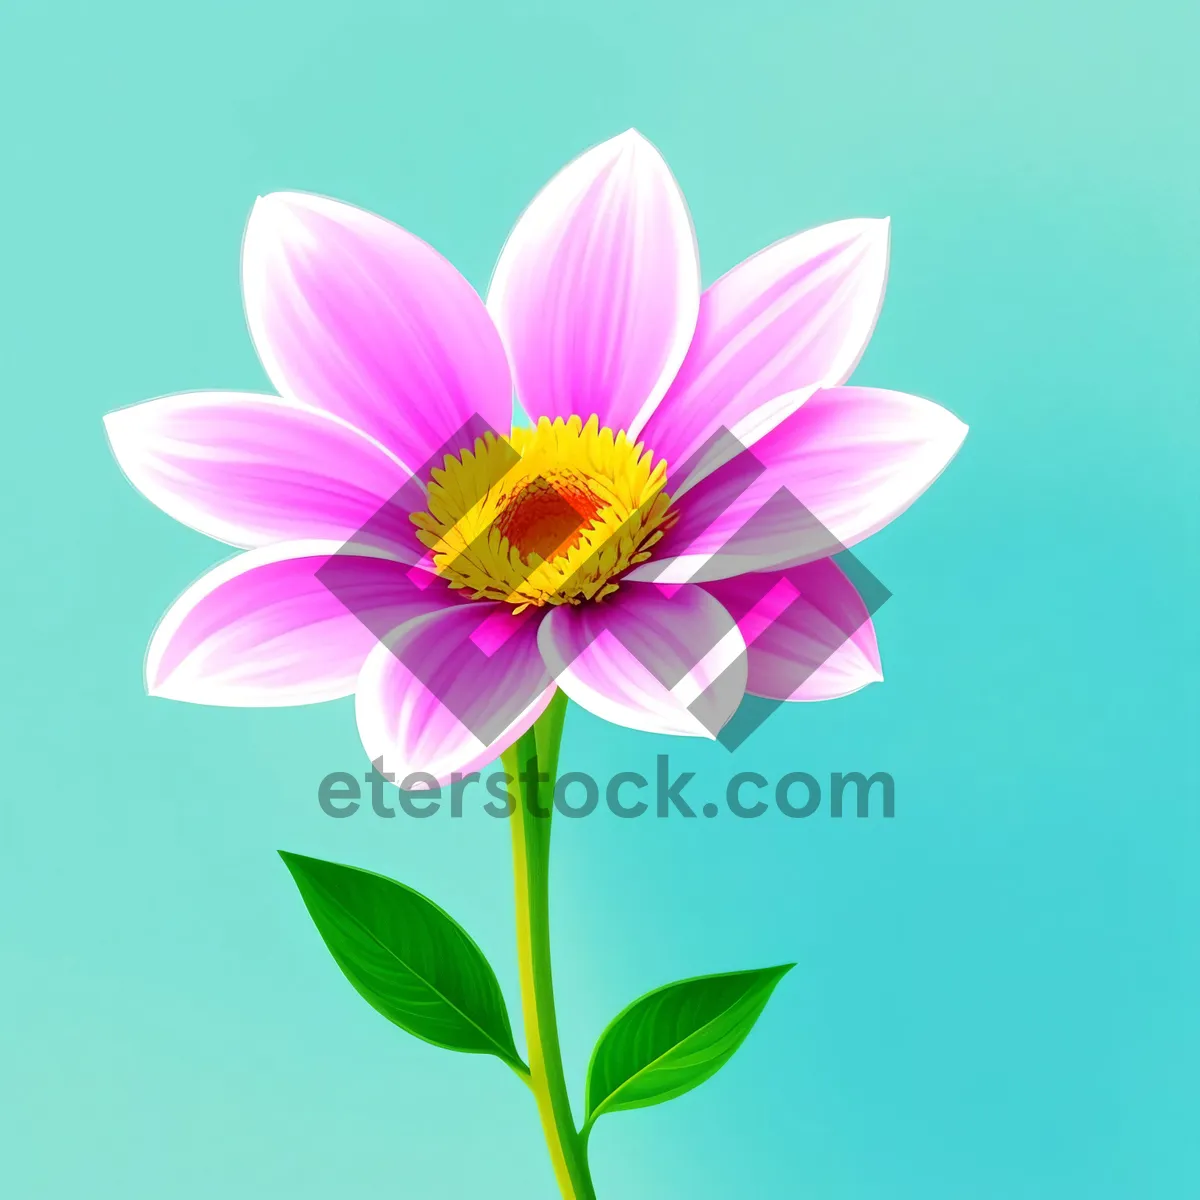 Picture of Pink Lotus Bloom - Stunning Floral Beauty